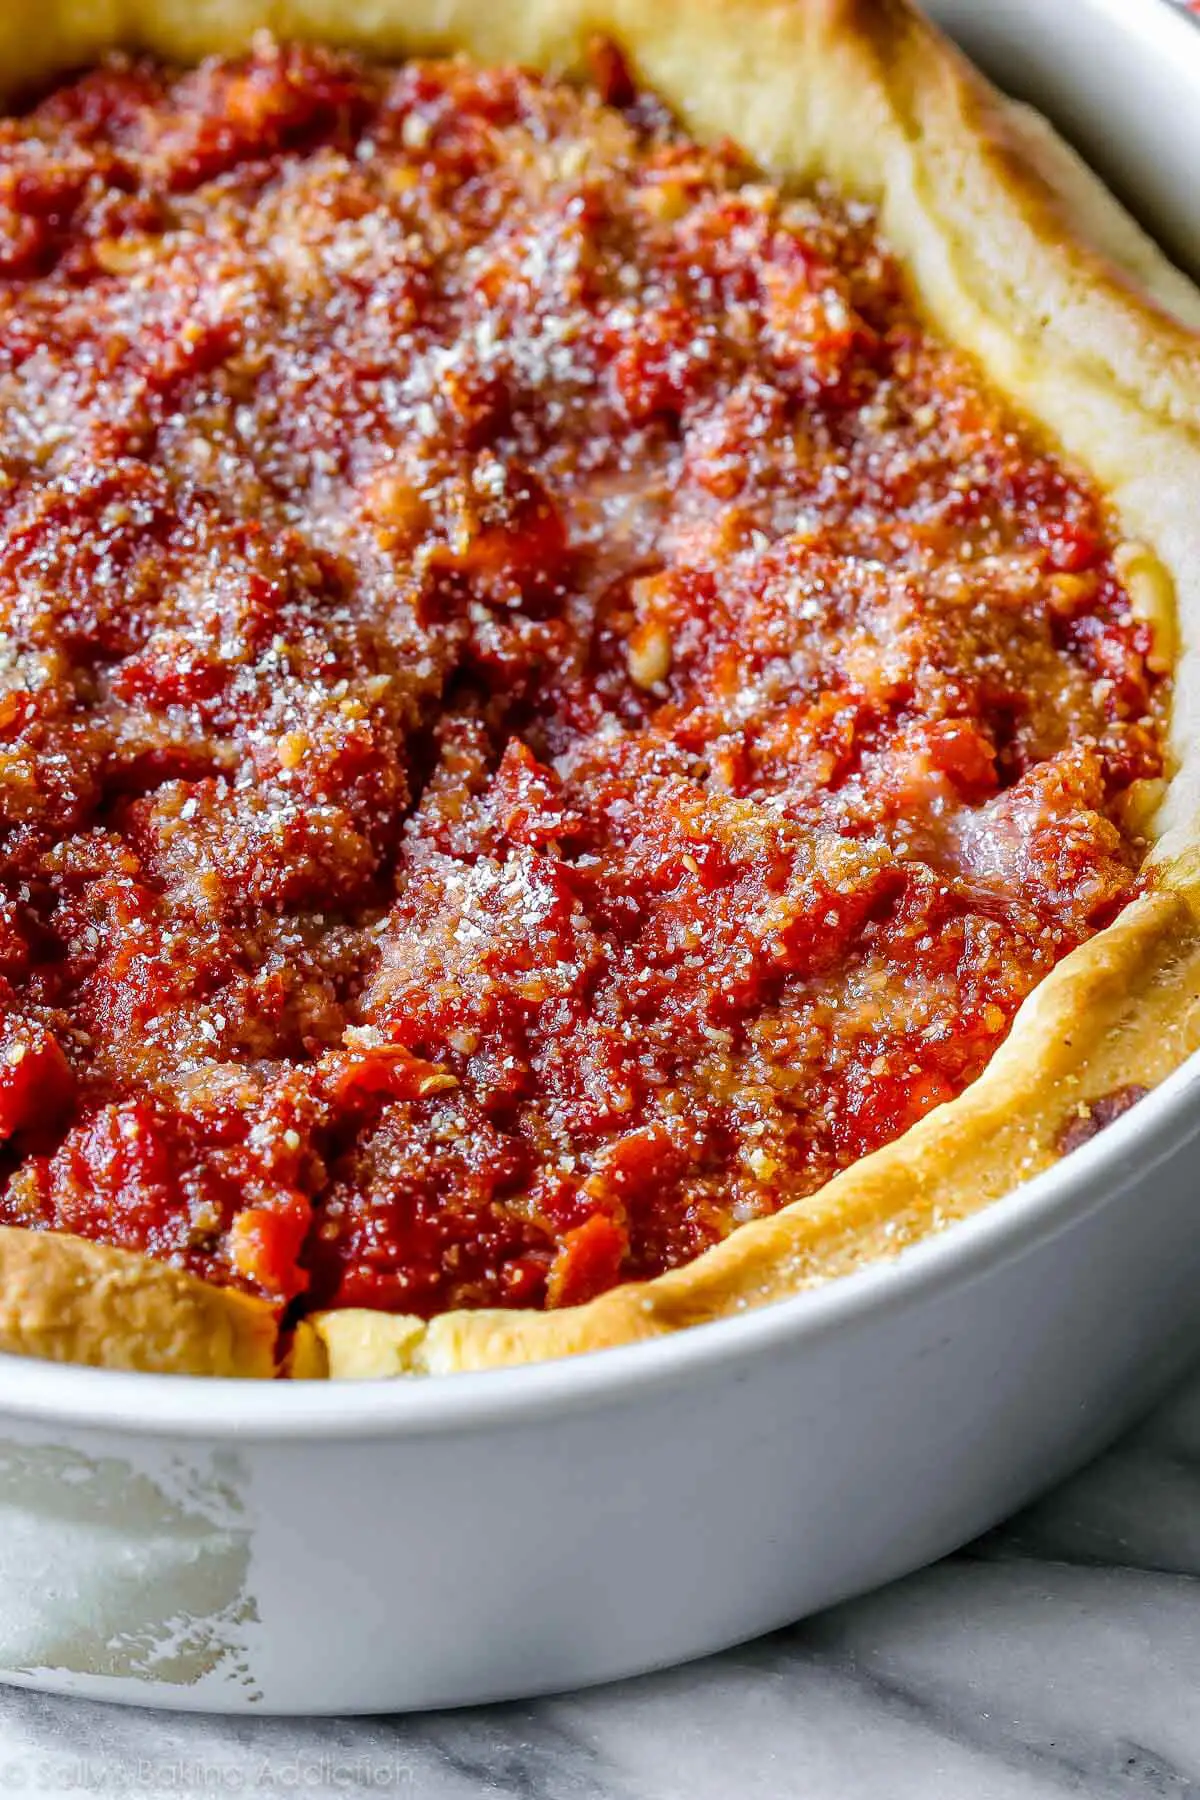 The 5 Best Chicago Deep Dish Pizza Recipes To Make In Your Lockdown Pjs